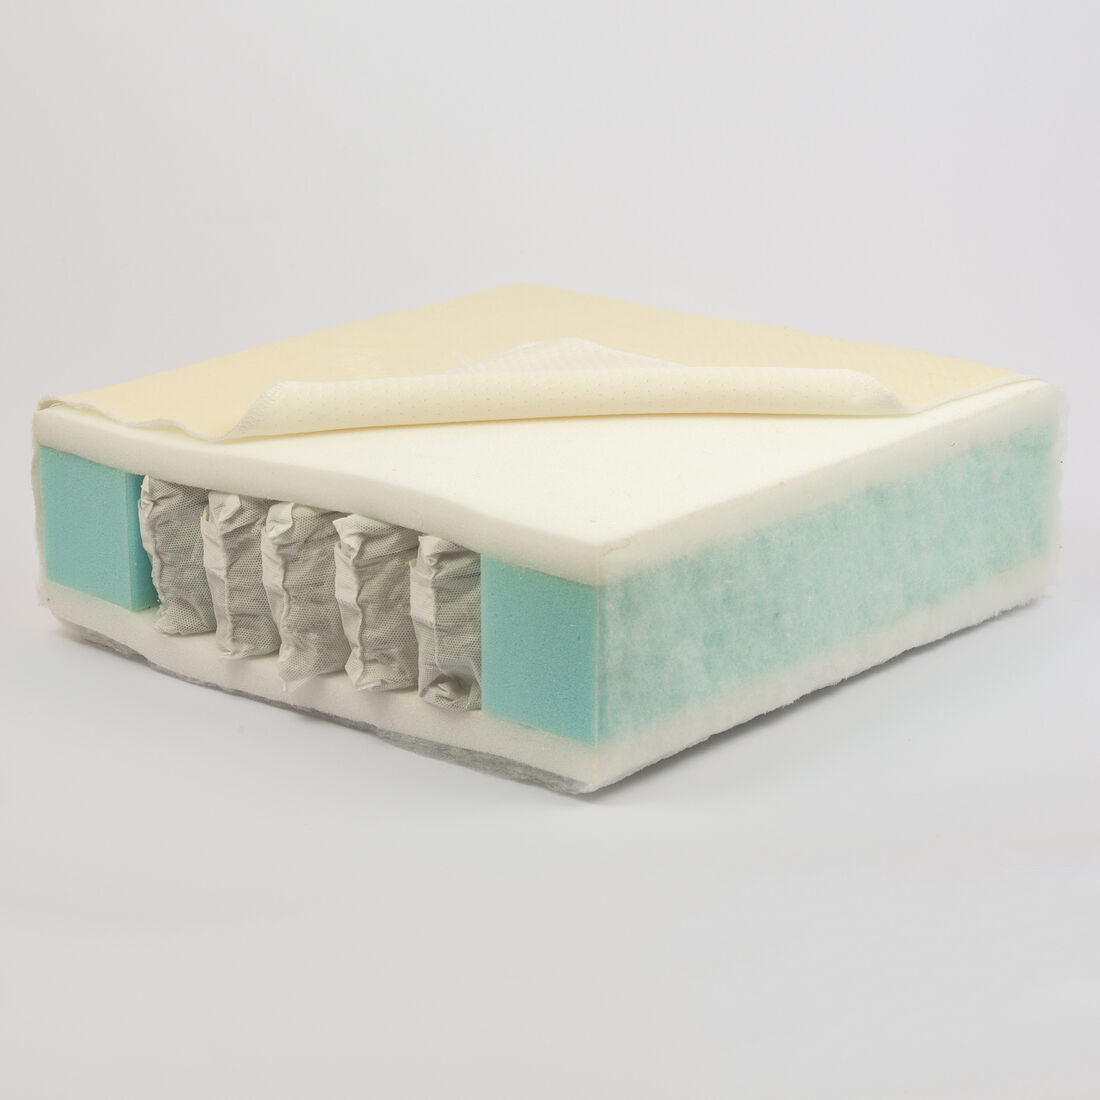 Custom size mattress for cot beds - you tell us the size & shape you want